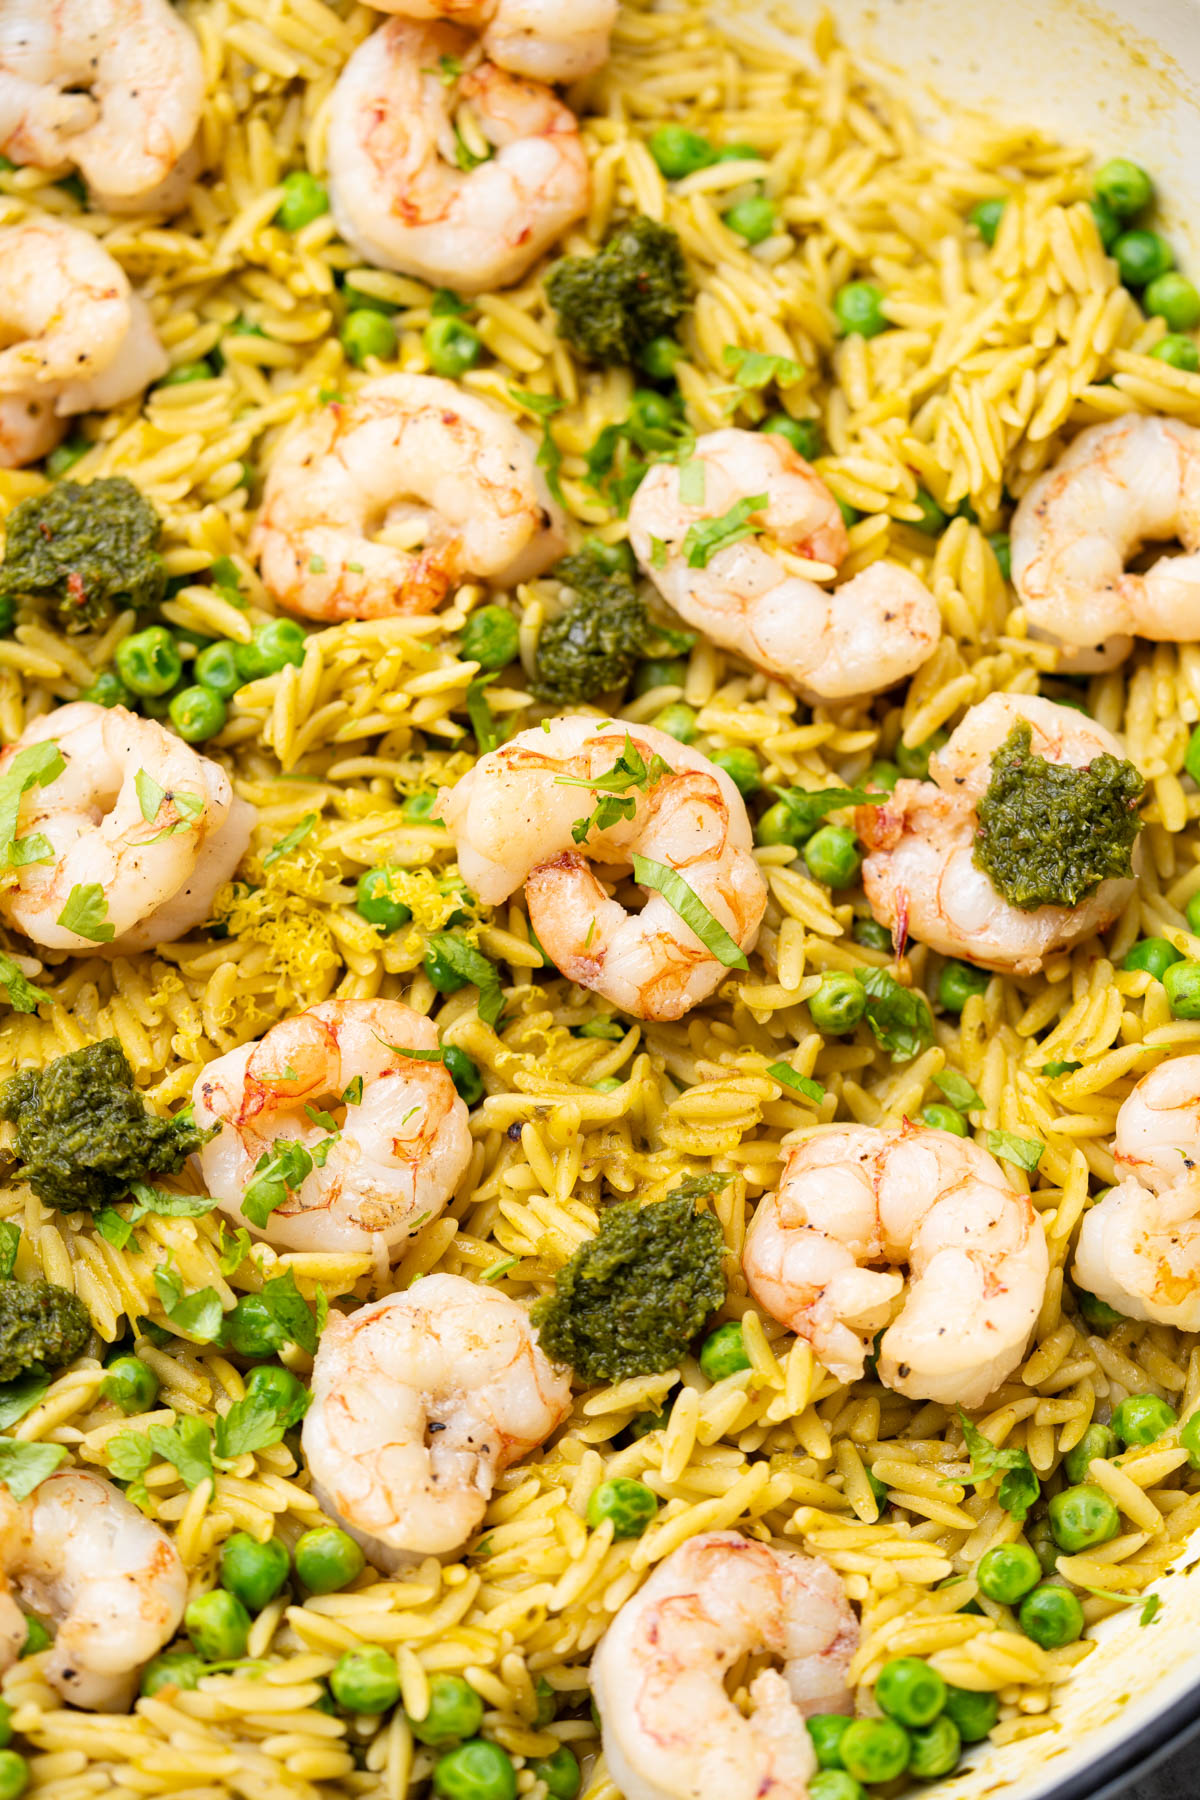 Orzo with chimichurri sauce, peas and shrimp in a skillet.